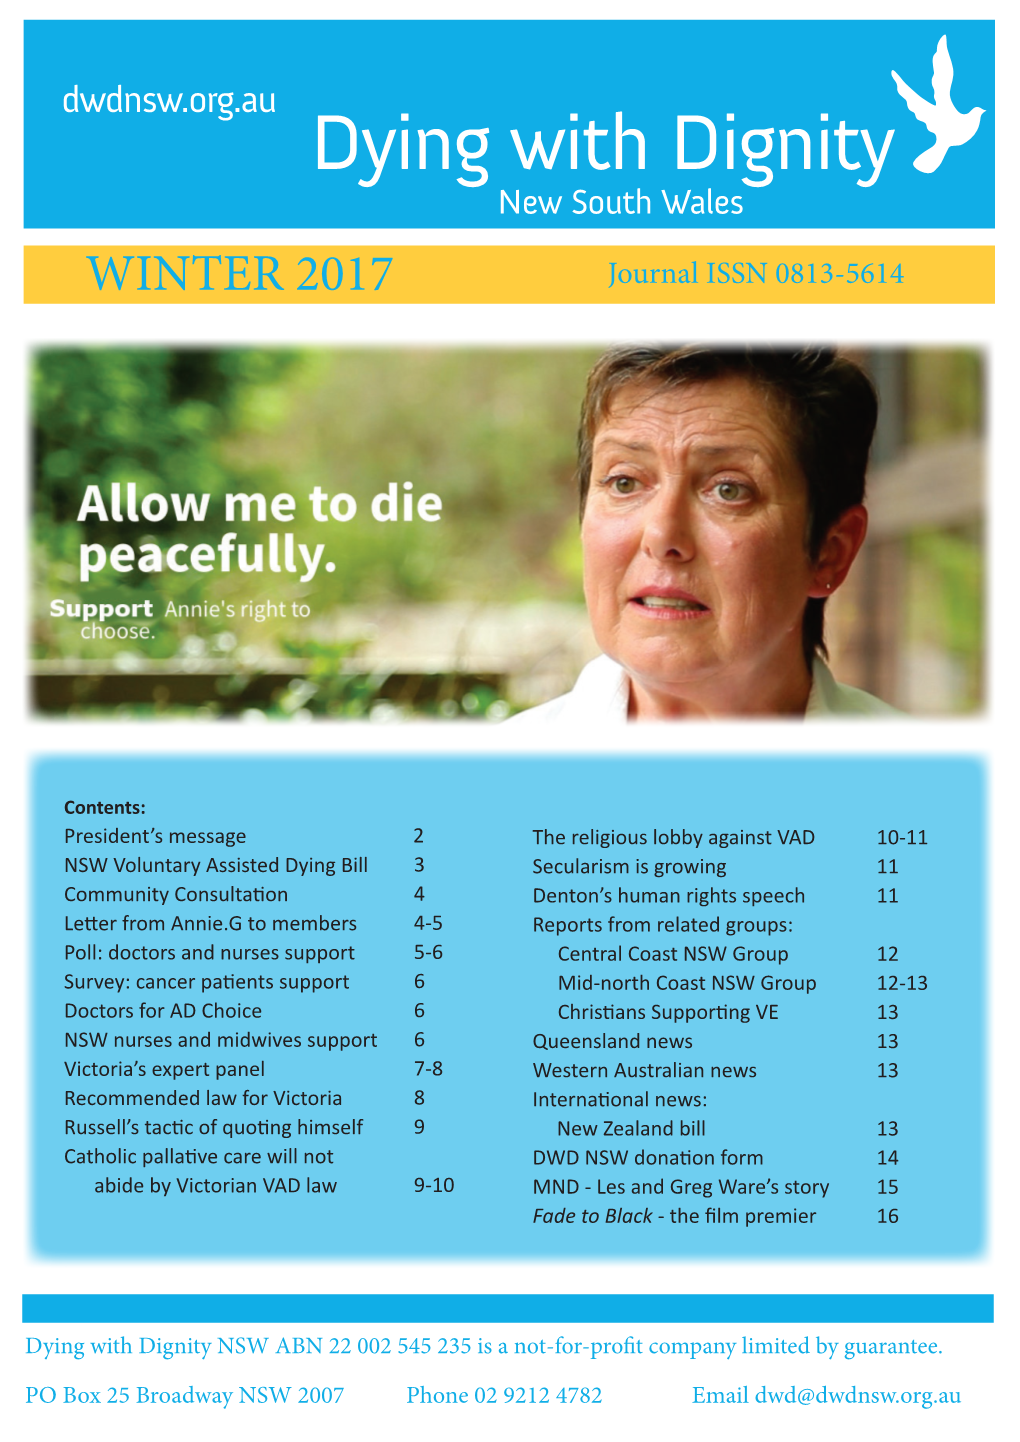 Our Winter 2017 Newsletter